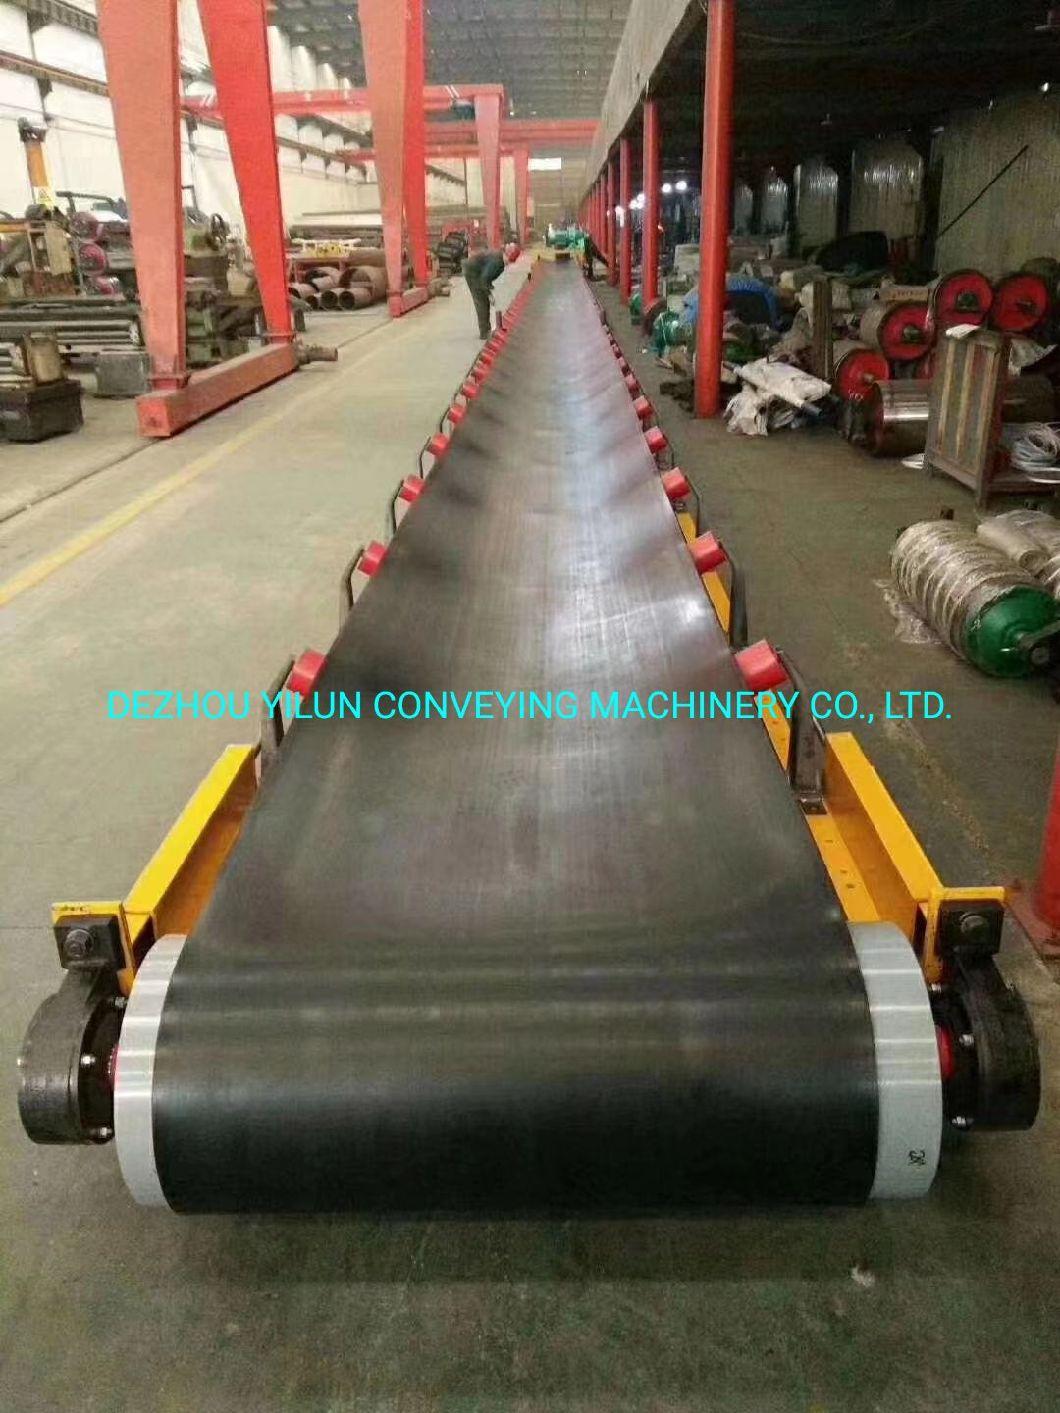 Fixed Tripper Belt Conveyor Used in Coal Mining, Metallurgical, Ports and Wharf, Chemical, Petroleum and Mechanical Industry